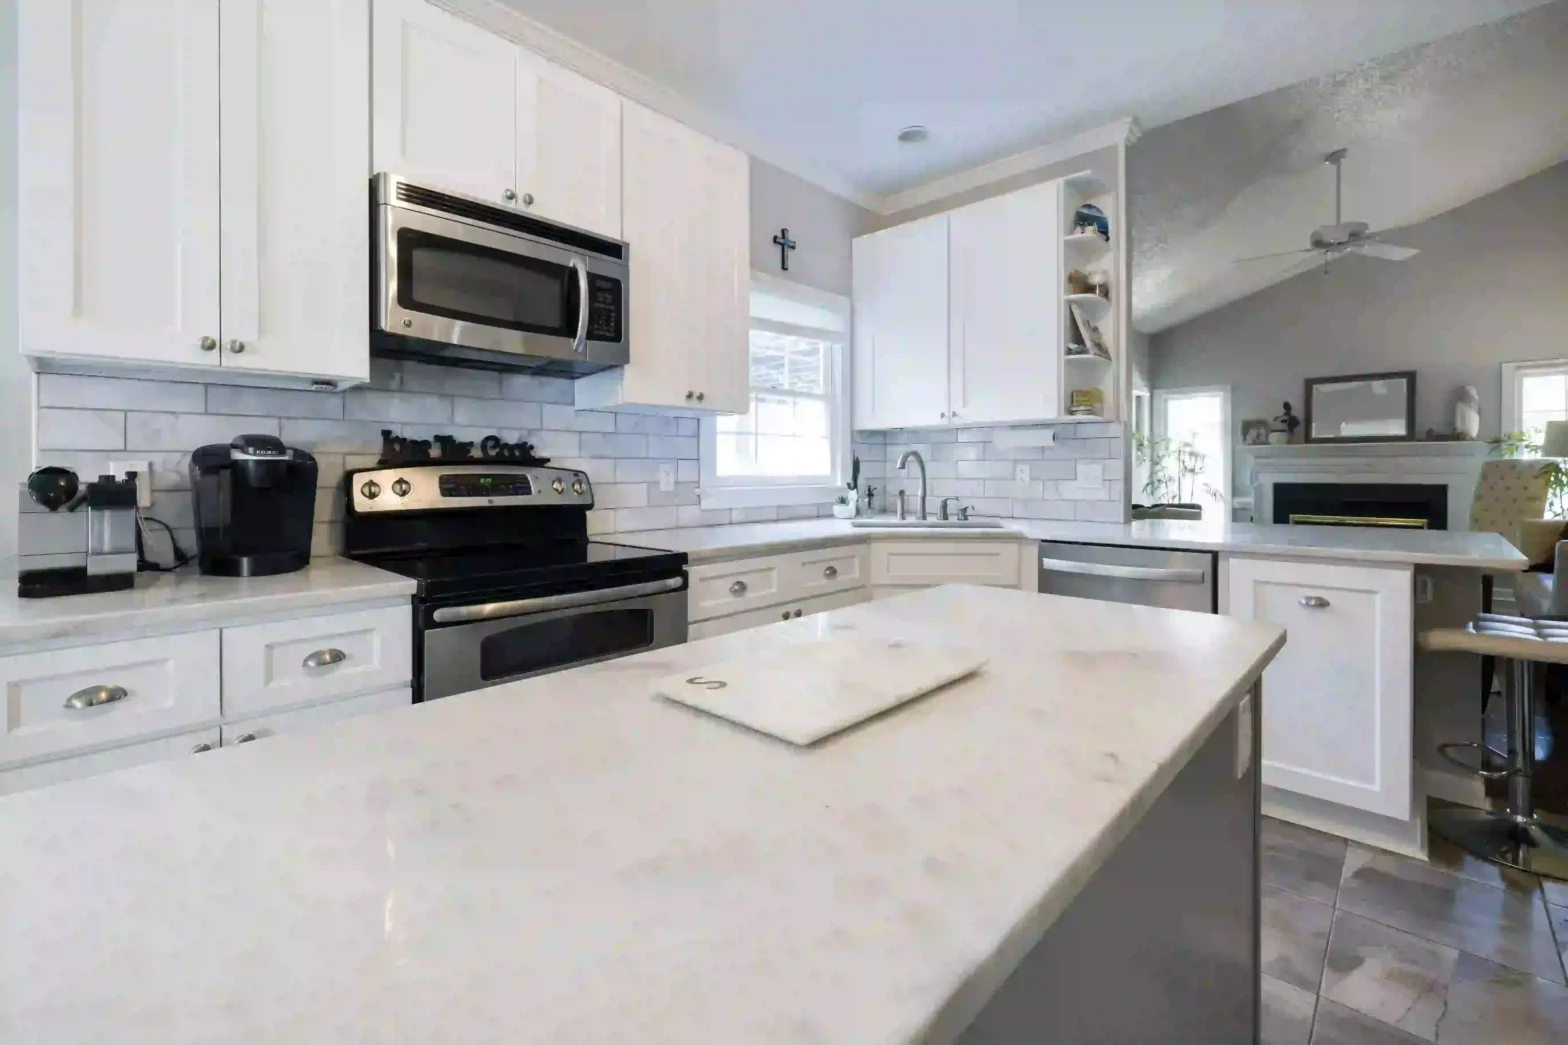 5 Easy Ways To Clean Hard Water Stains From Countertops?